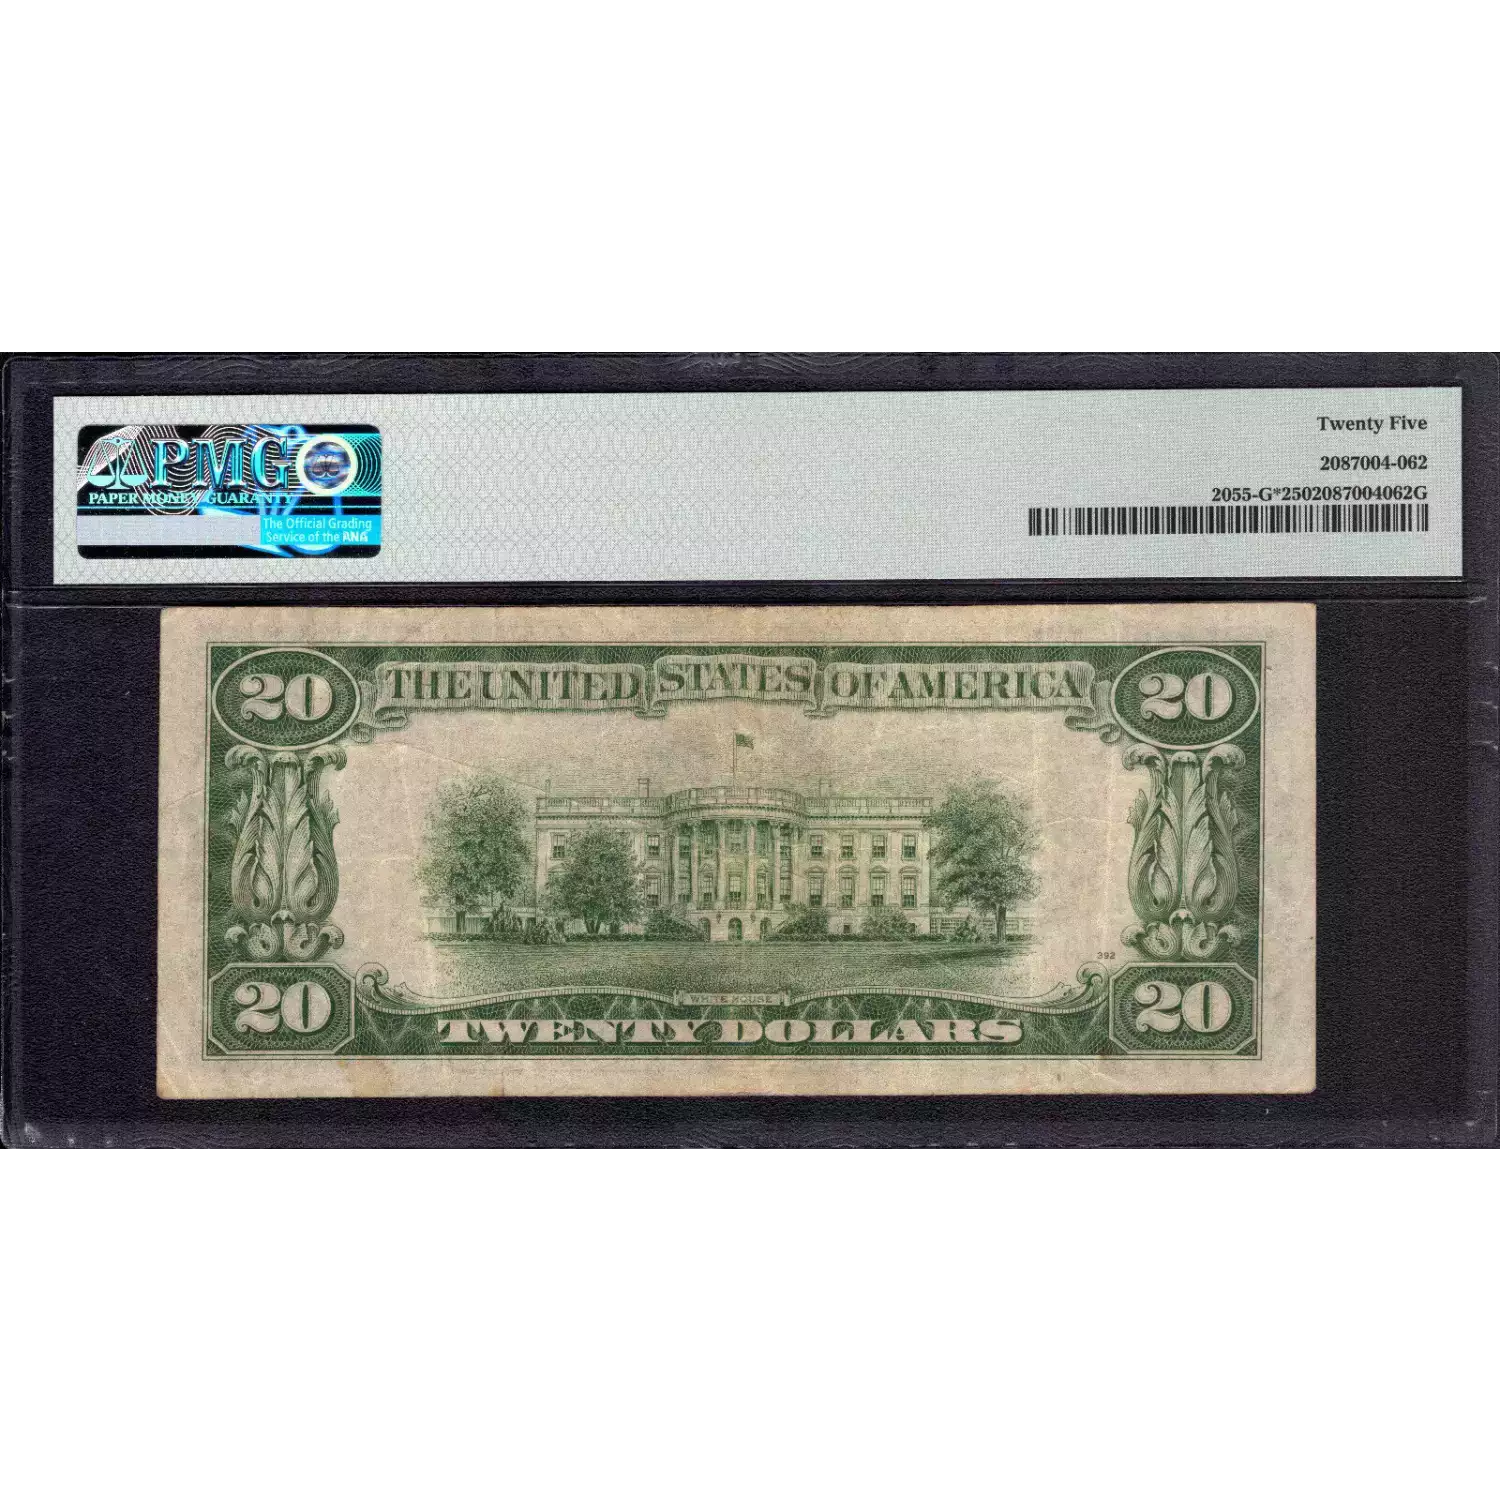 Federal Reserve Note Chicago (3)